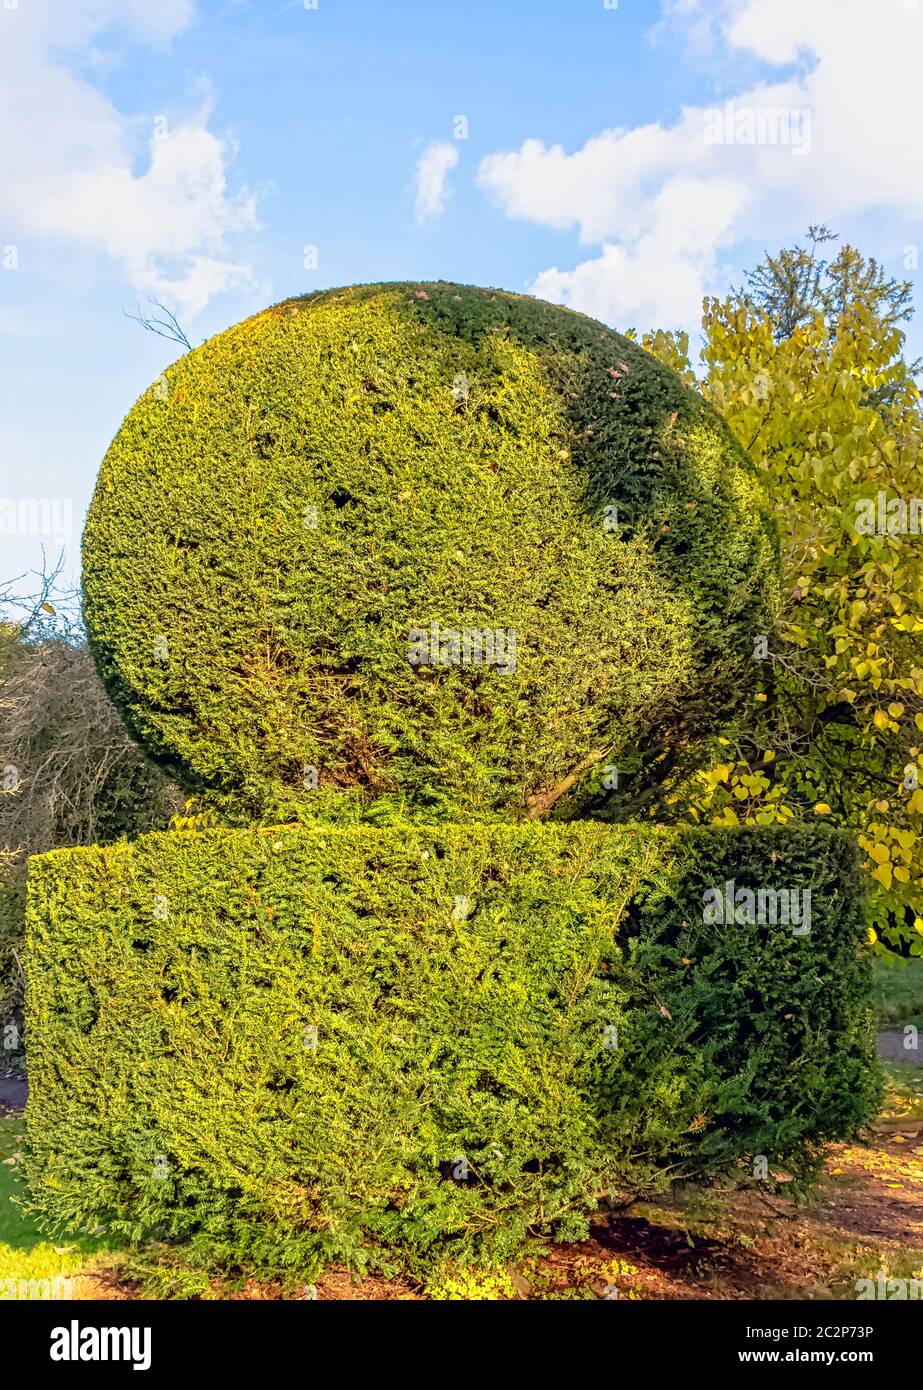 Topiary garden with shrub trimmed into shape Stock Photo